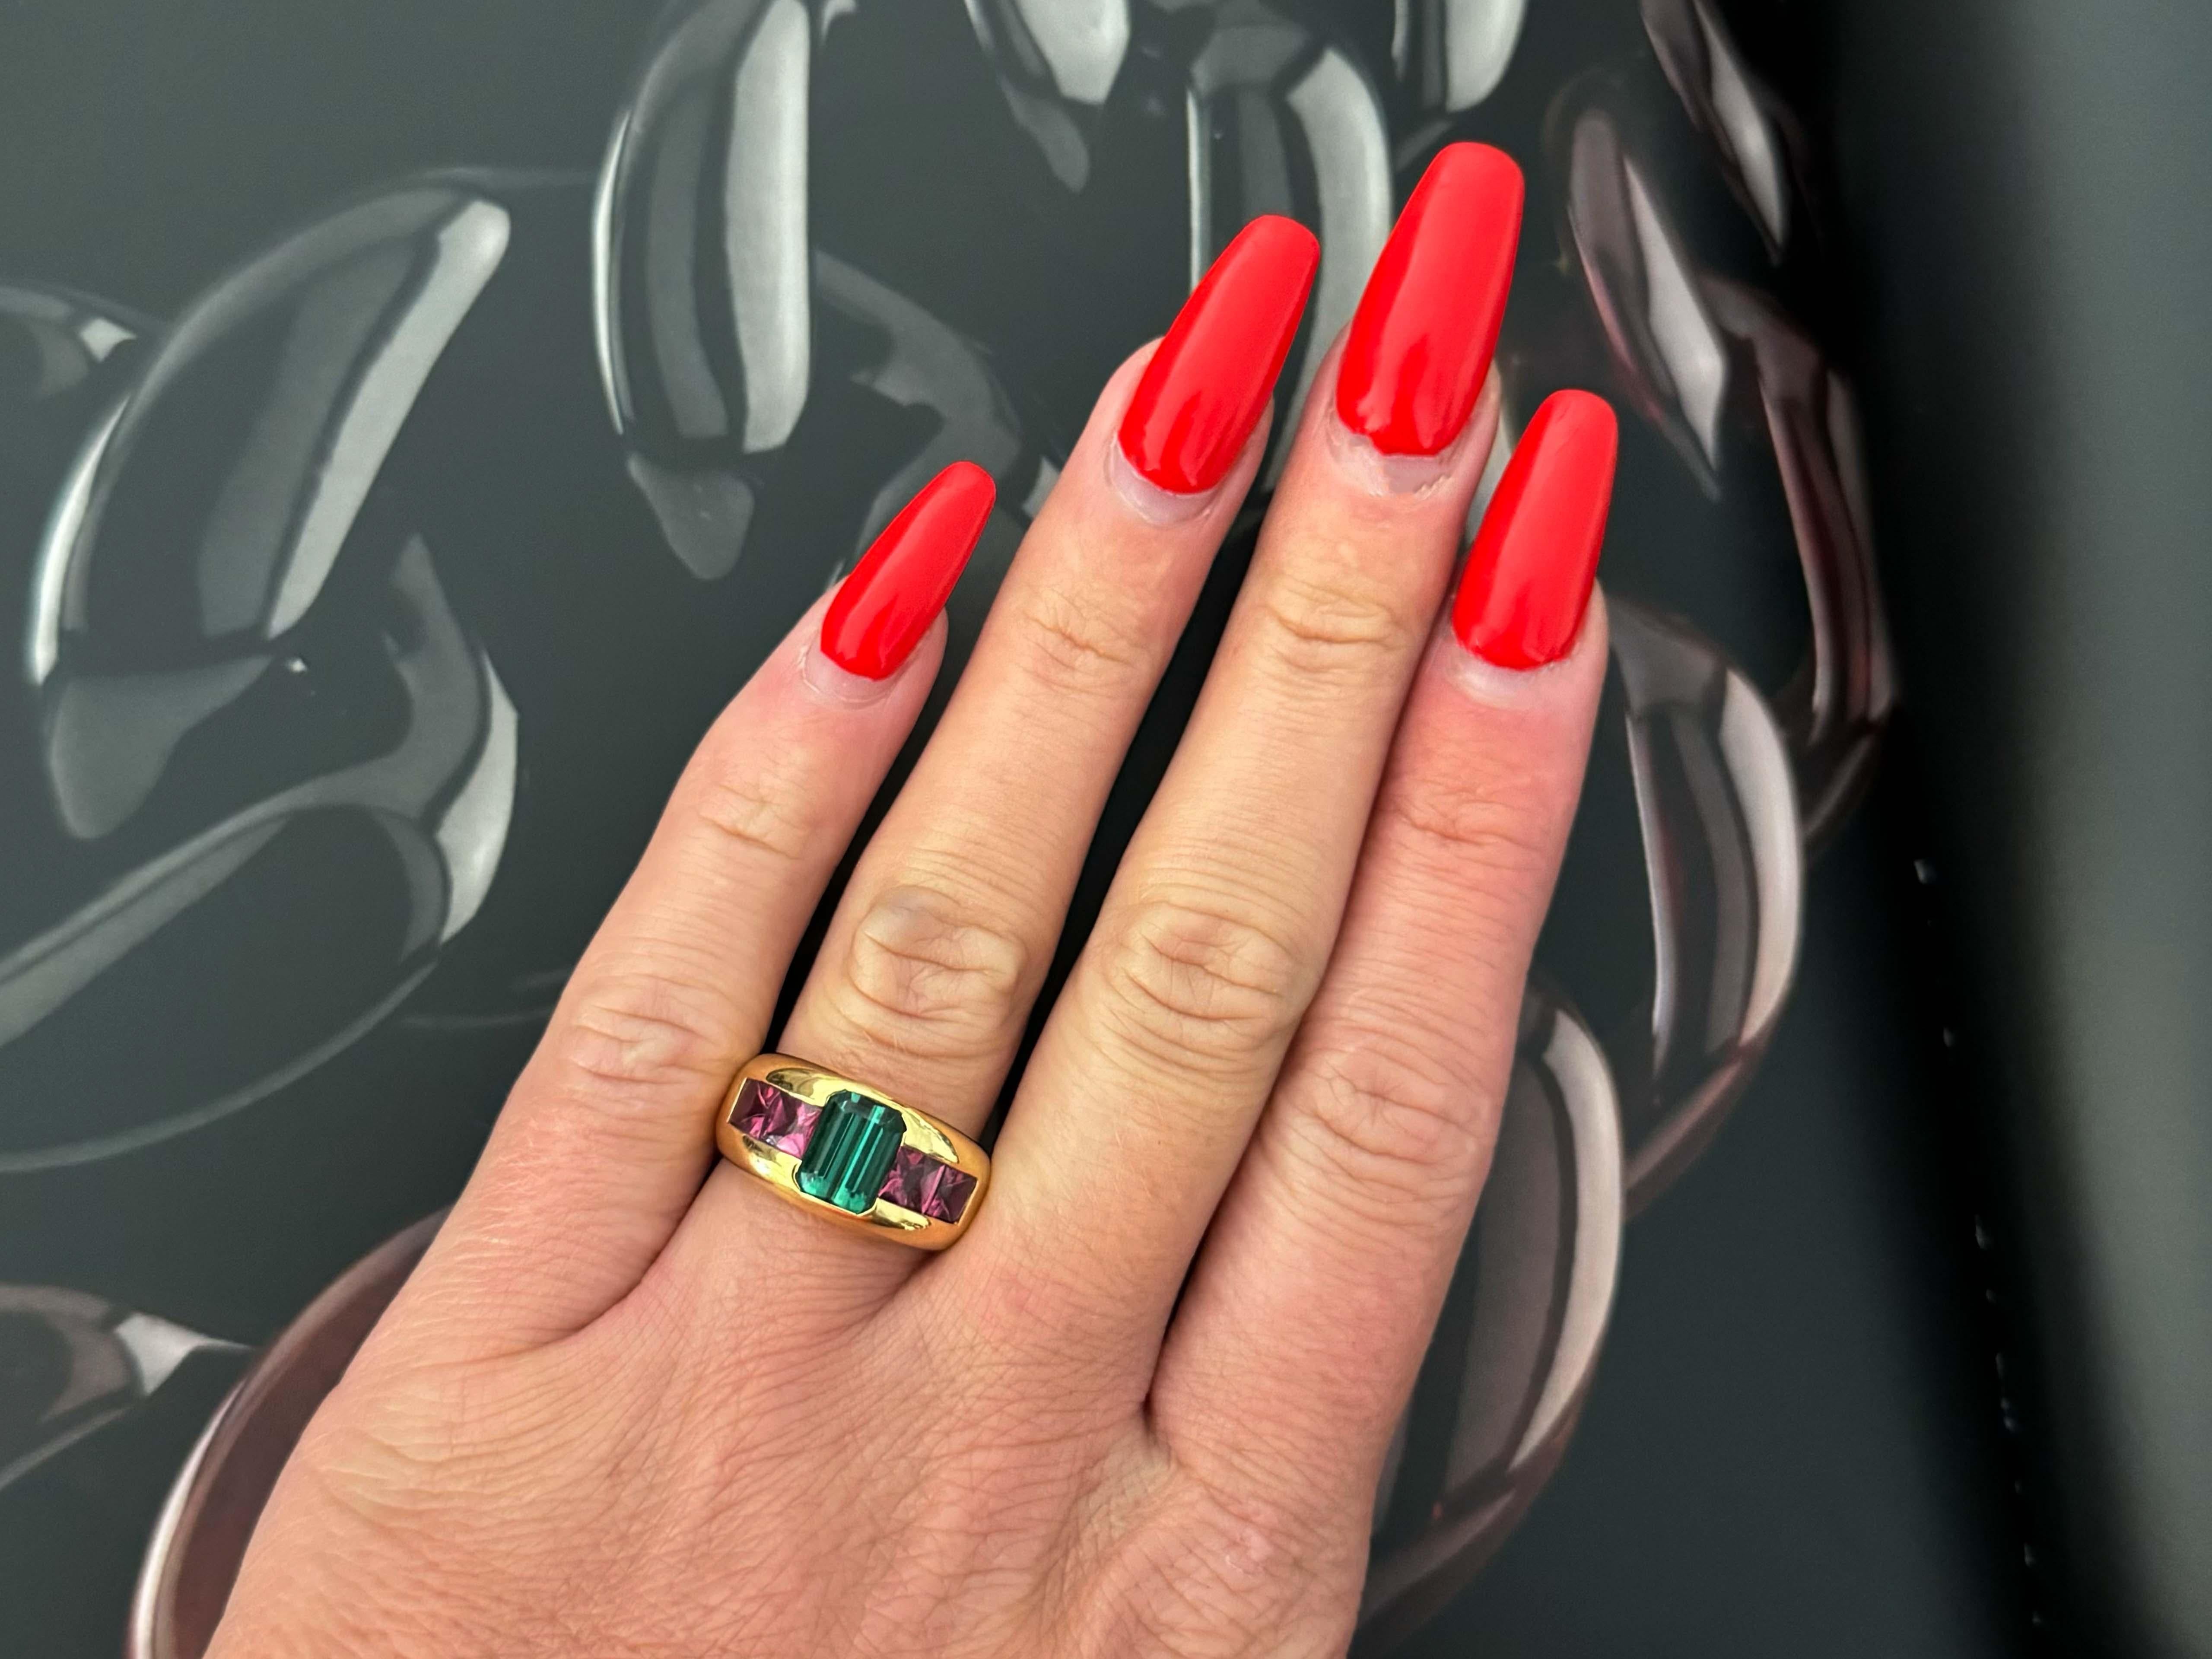 Item Specifications:

Metal: 18K Yellow Gold

Ring Size: 6.75

Total Weight: 10.1 Grams

Gemstone Specifications:

Gemstones: pink and green tourmaline

Condition: Preowned, Excellent

Stamped: 